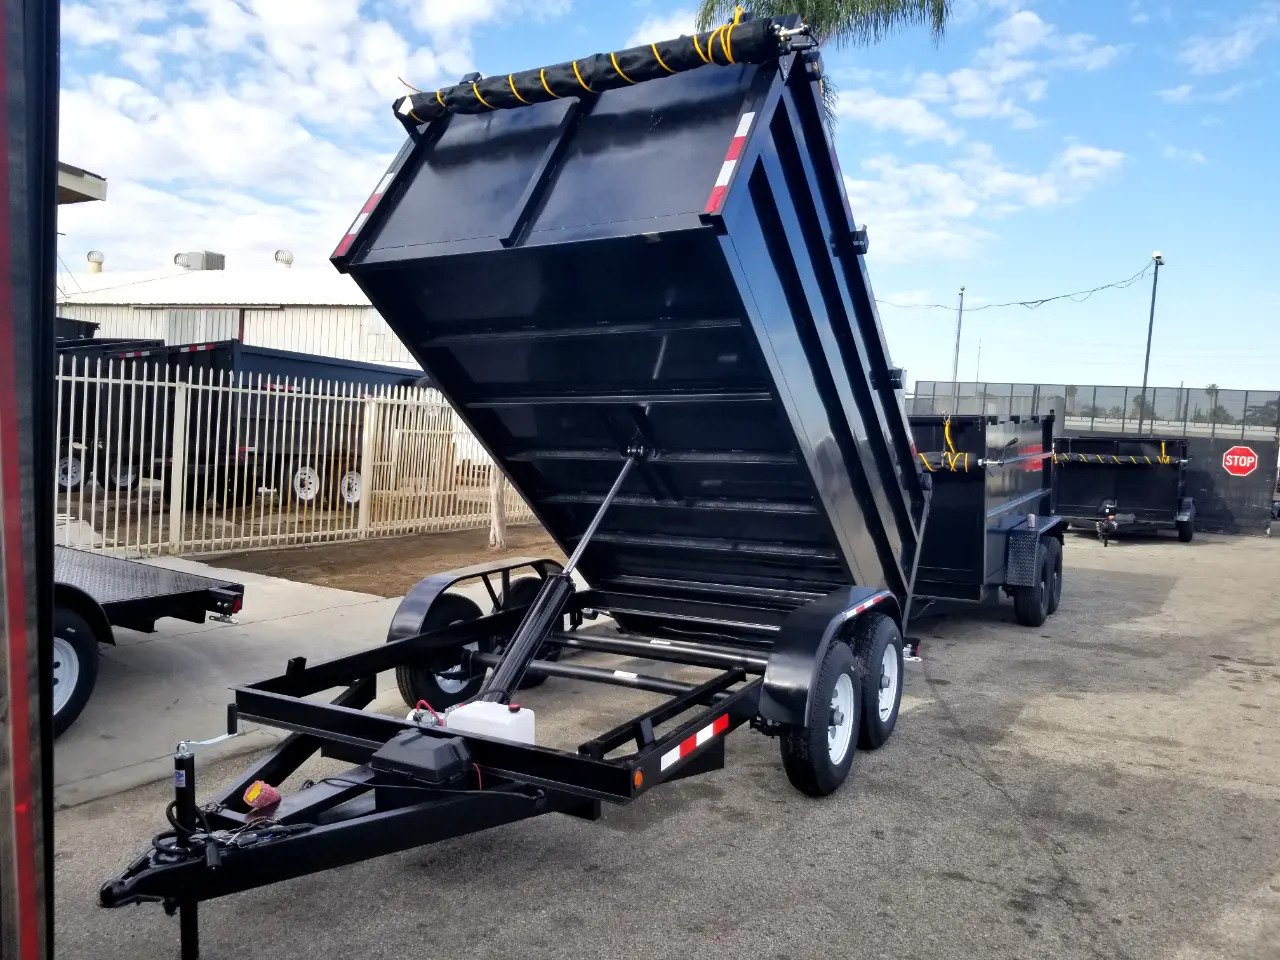 5 Reasons to Choose Our Trailers for Rent in Southern California